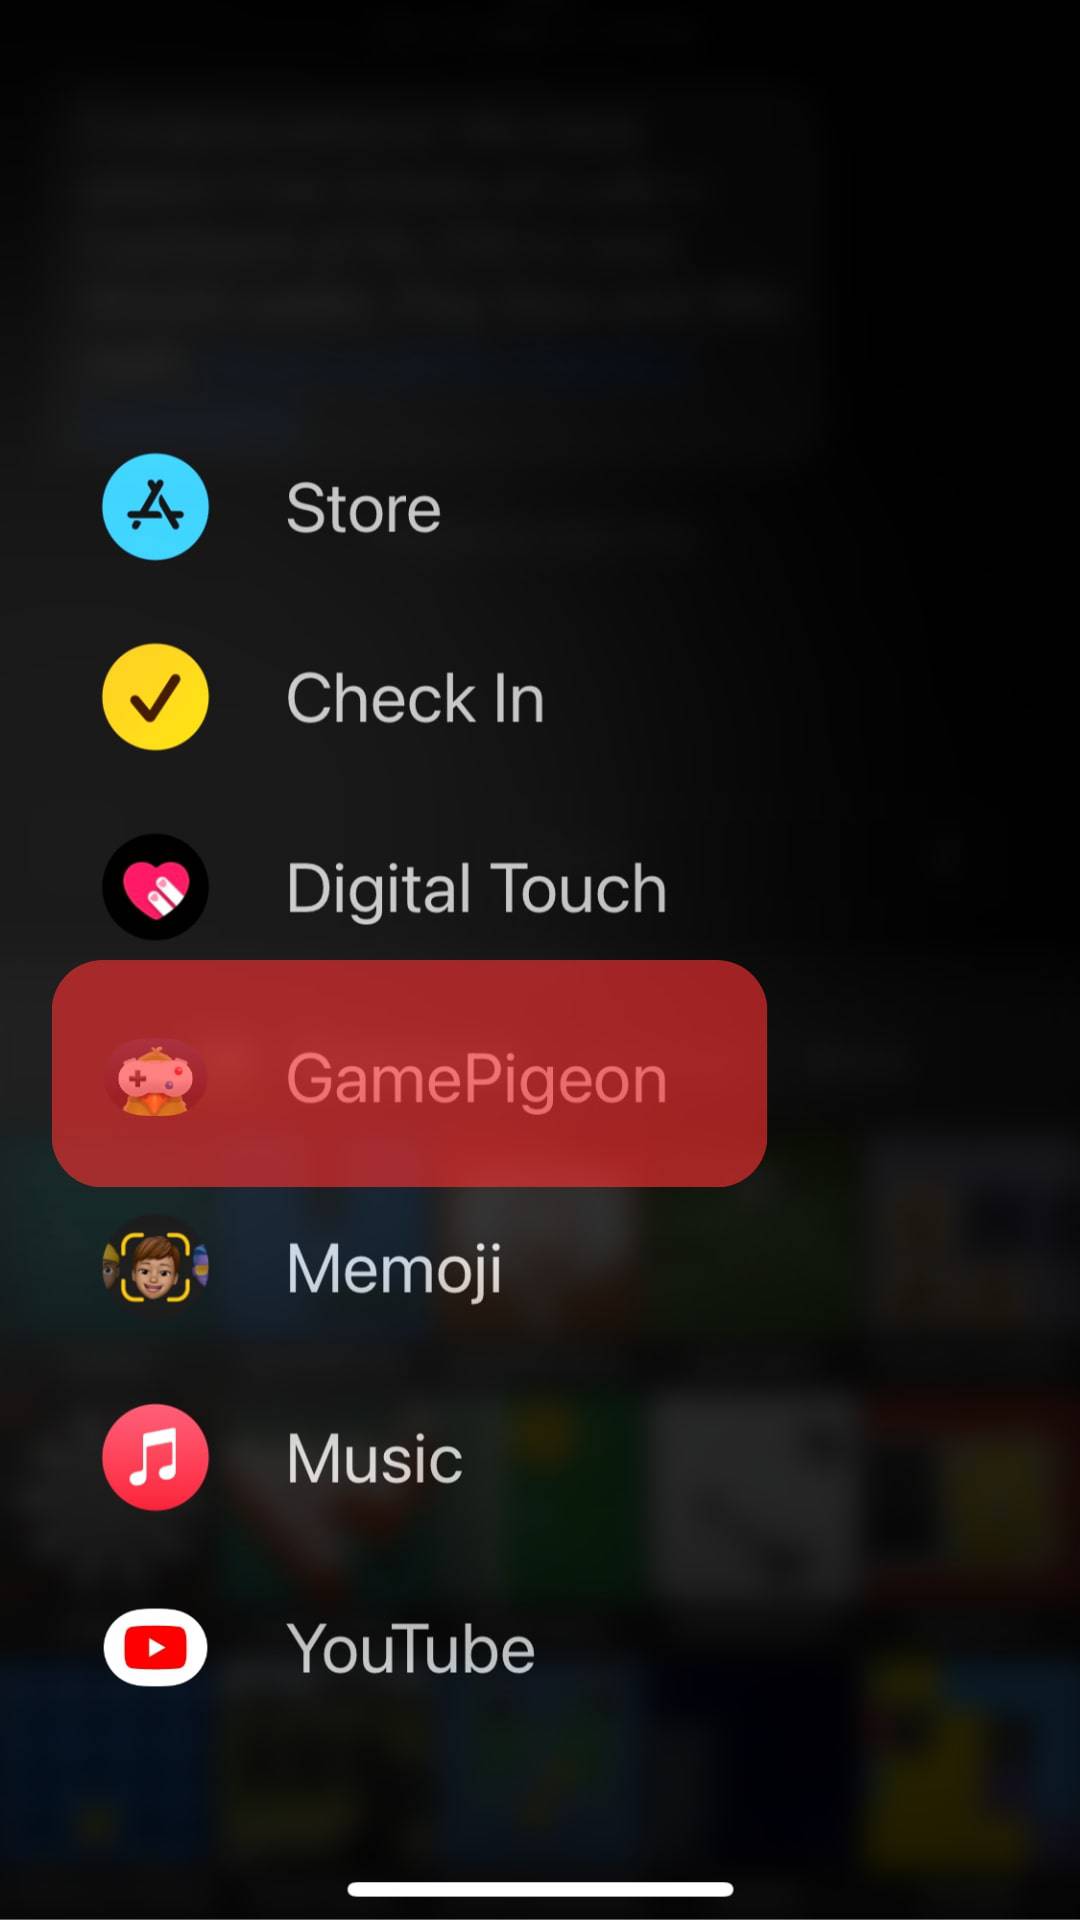 Select The Gamepigeon Icon Above The Chat